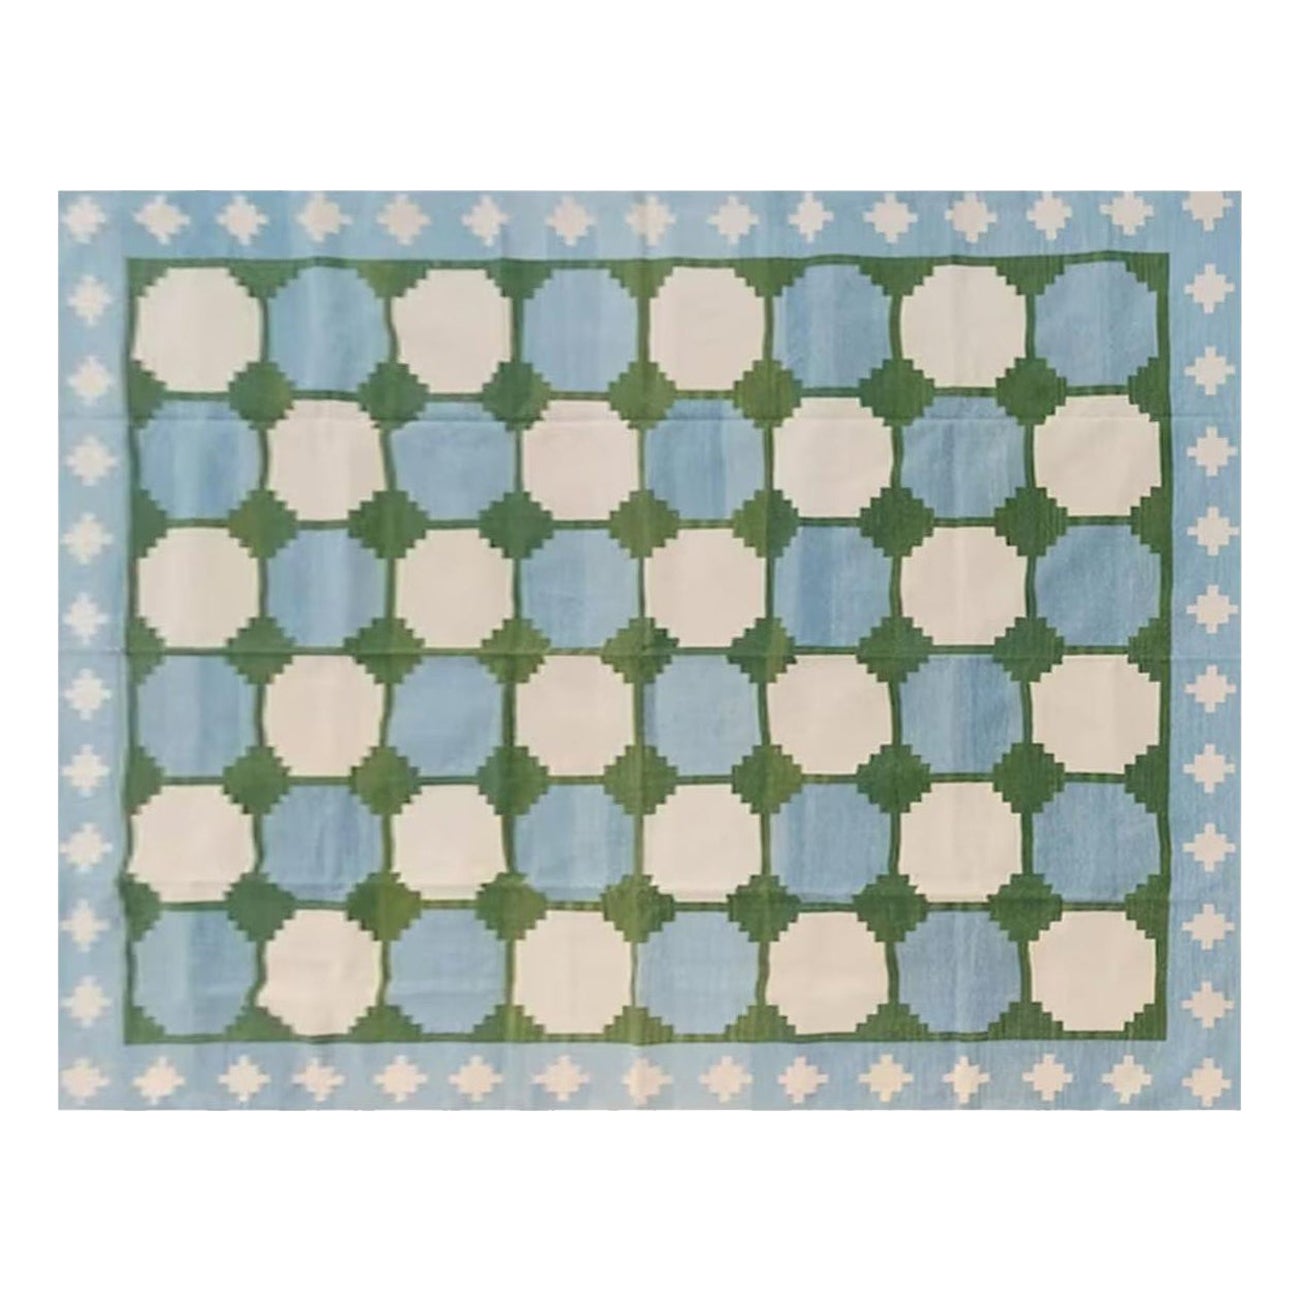 Handmade Cotton Area Flat Weave Rug, 6x9 Blue And Green Tile Indian Dhurrie Rug